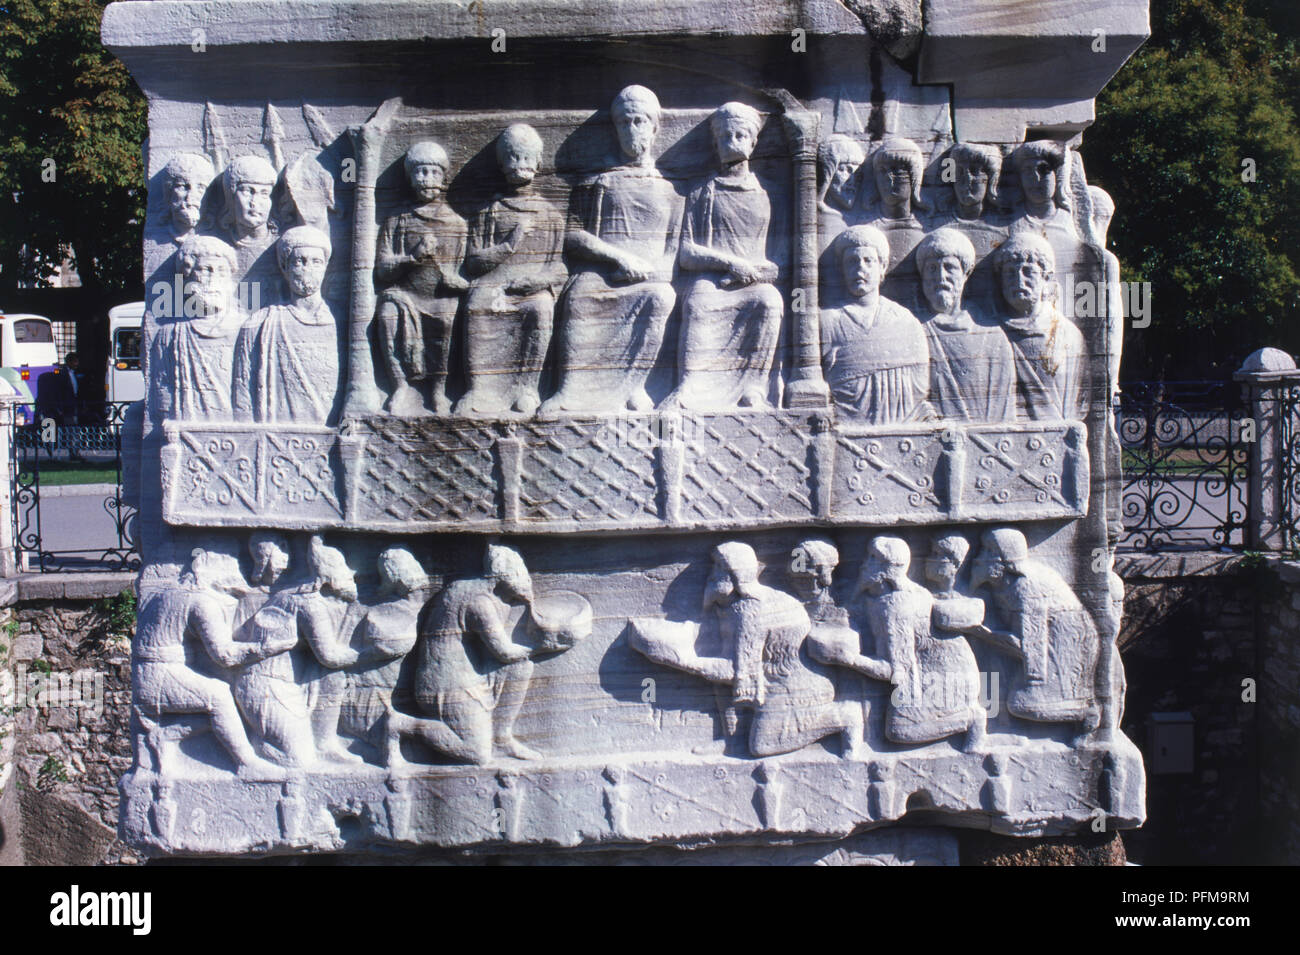 Asia, Turkey, Istanbul, Hippodrome, relief carved on the base of the Egyptian Obelisk, depicting figures in traditional dress, built in 1500 BC. Stock Photo